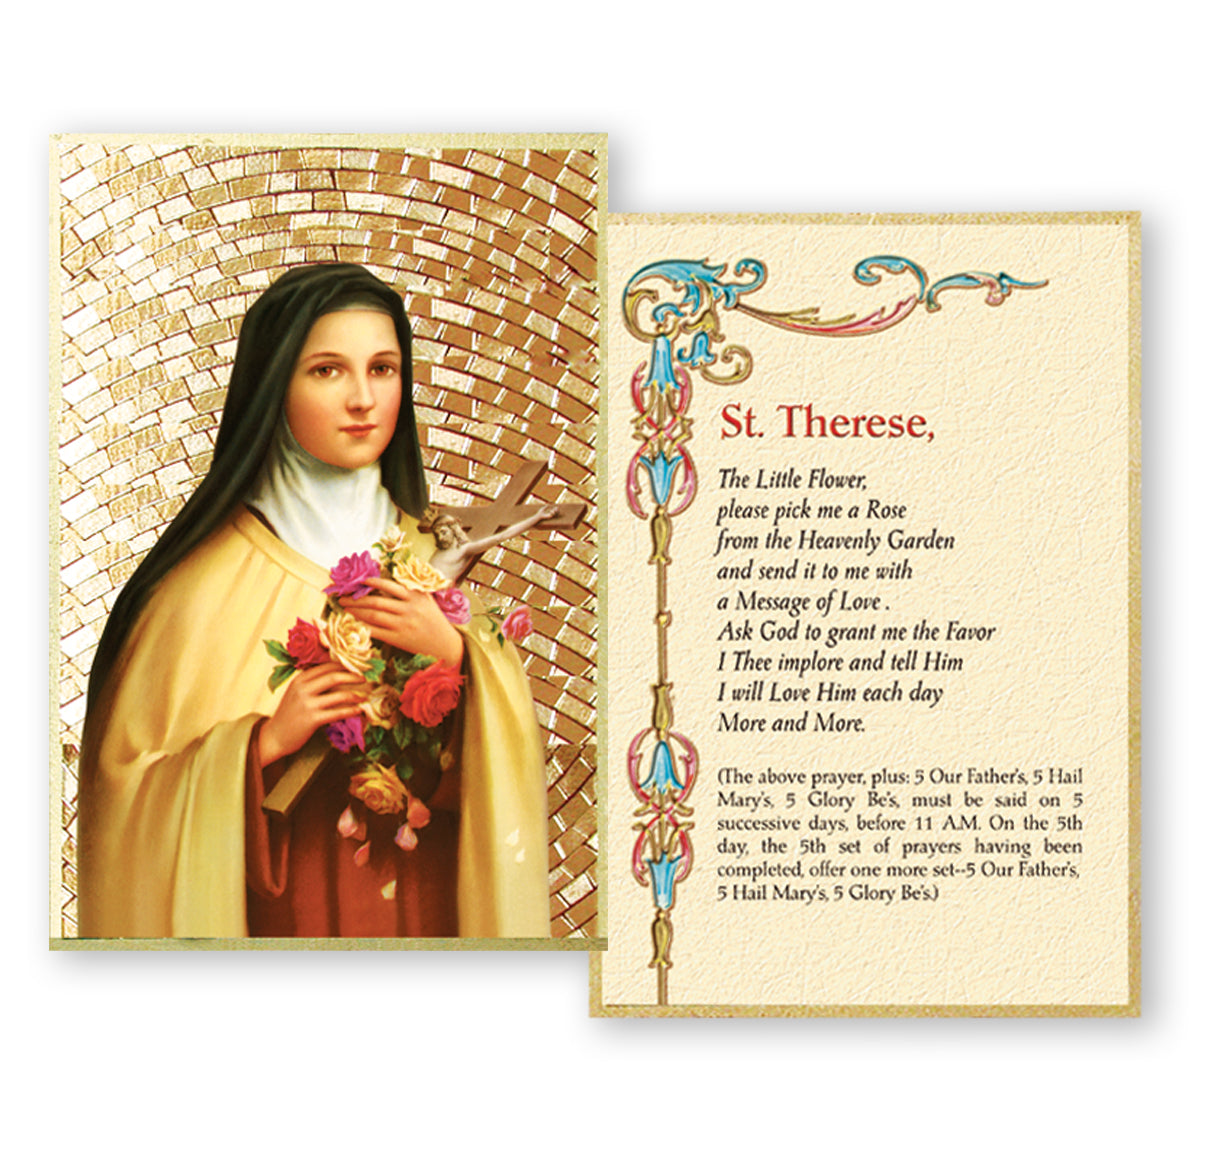 St. Therese Gold Foil Mosaic Plaque